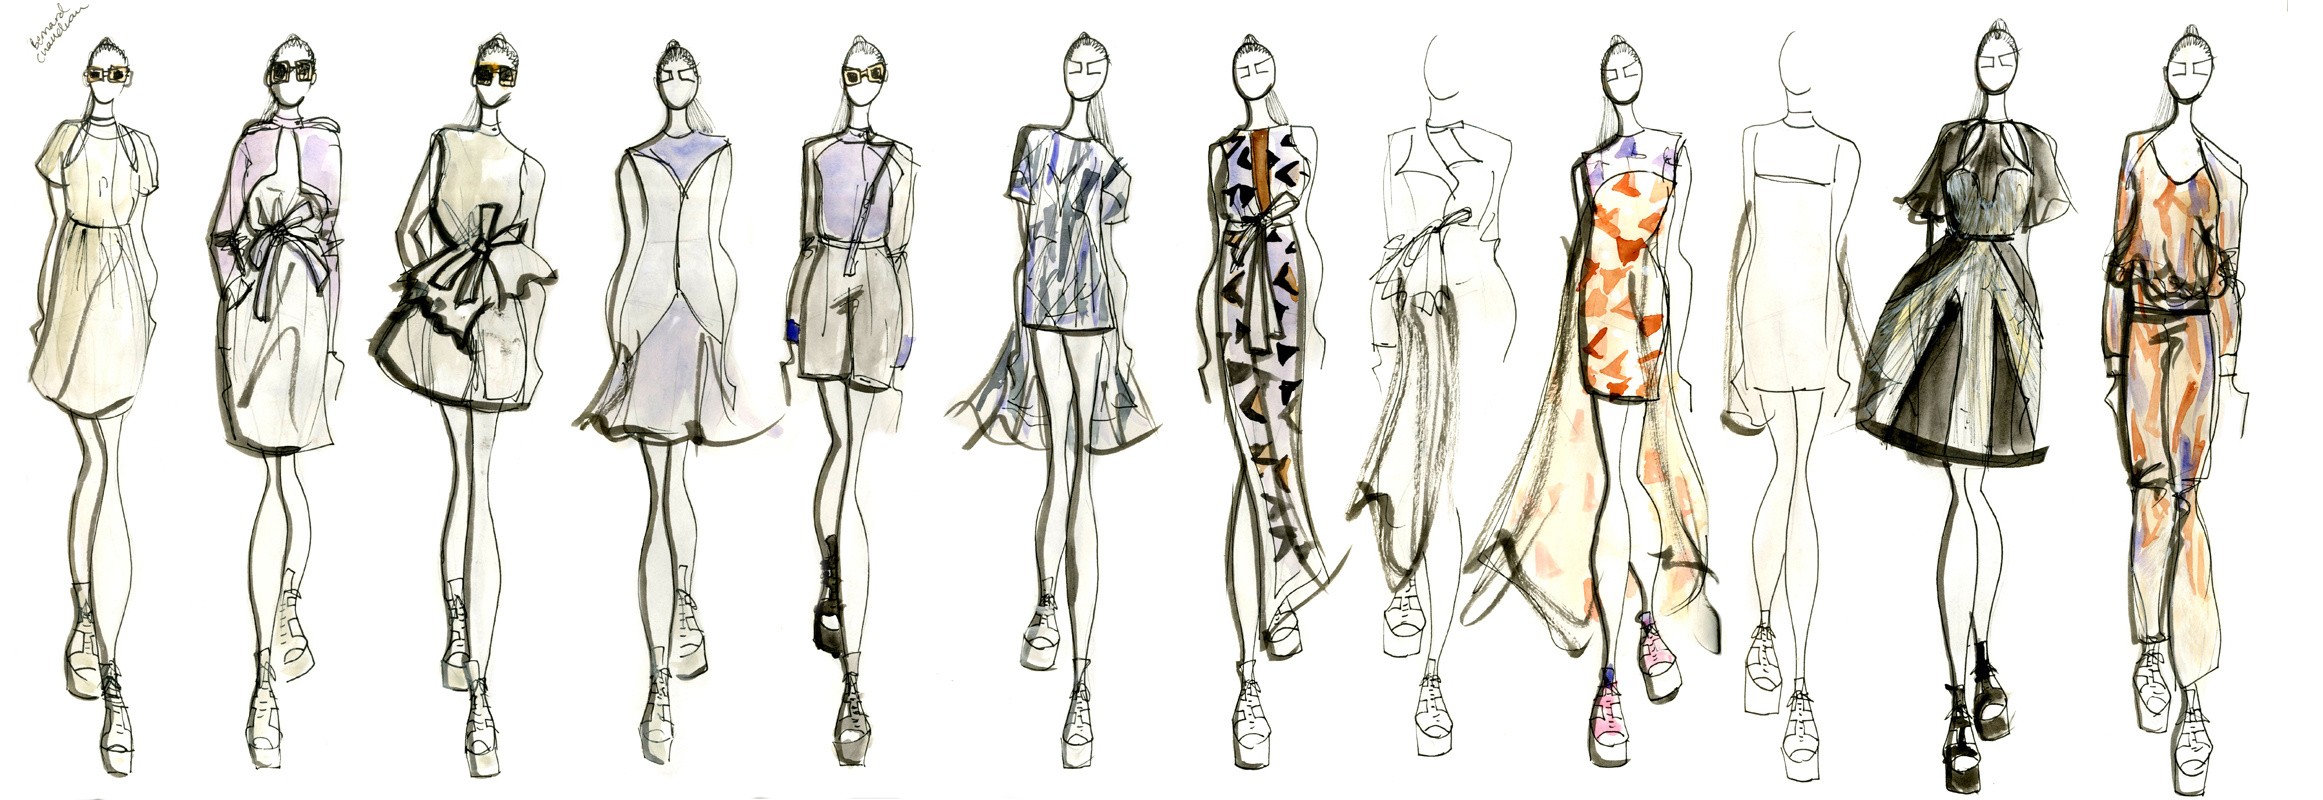 Beauty, lifestyle and fashion illustration by M Lithvall